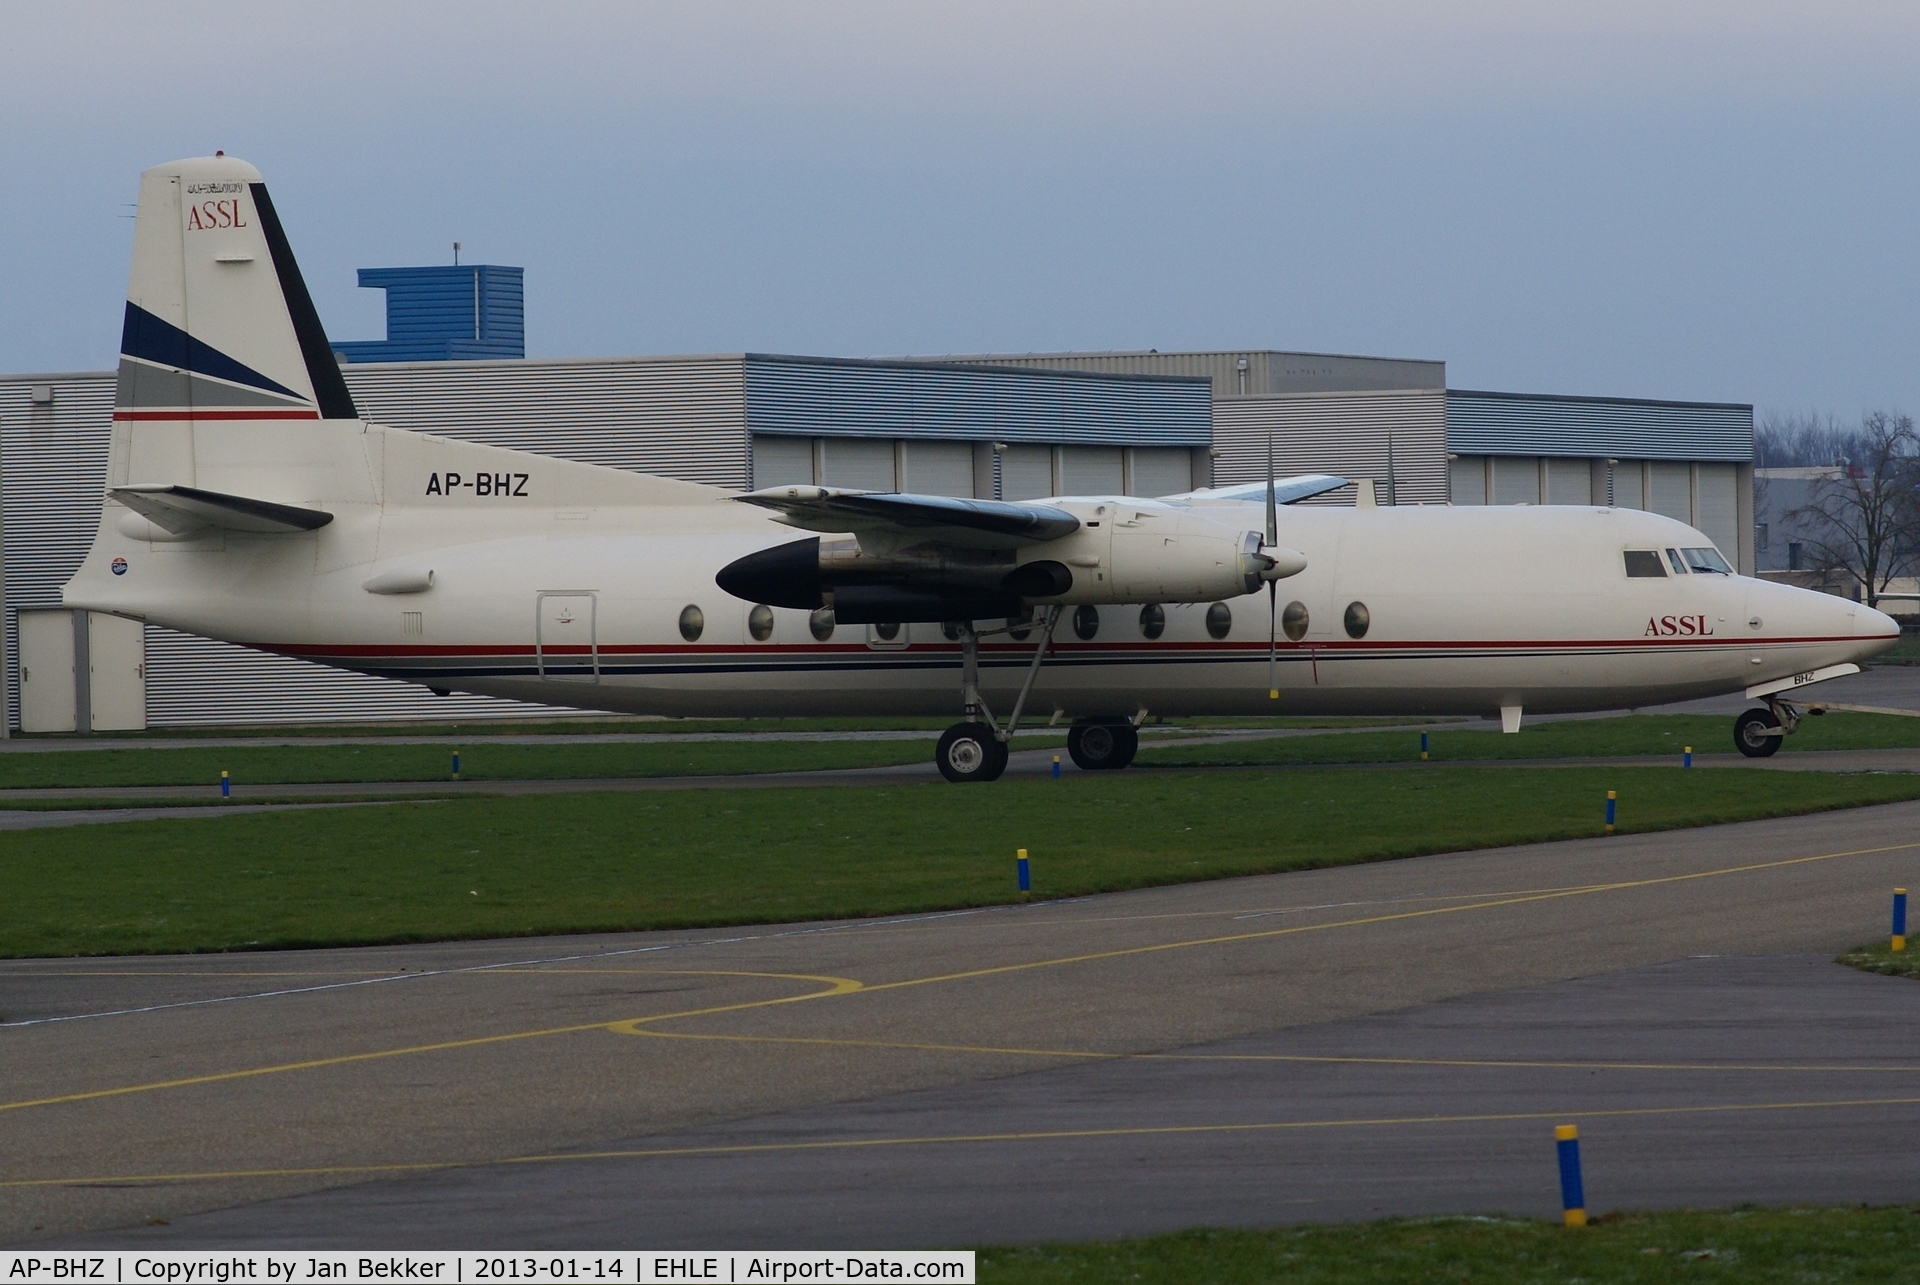 AP-BHZ, 1985 Fokker F-27-500 Friendship C/N 10686, Just arrived at Lelystad Airport. Now waiting for a buyer.